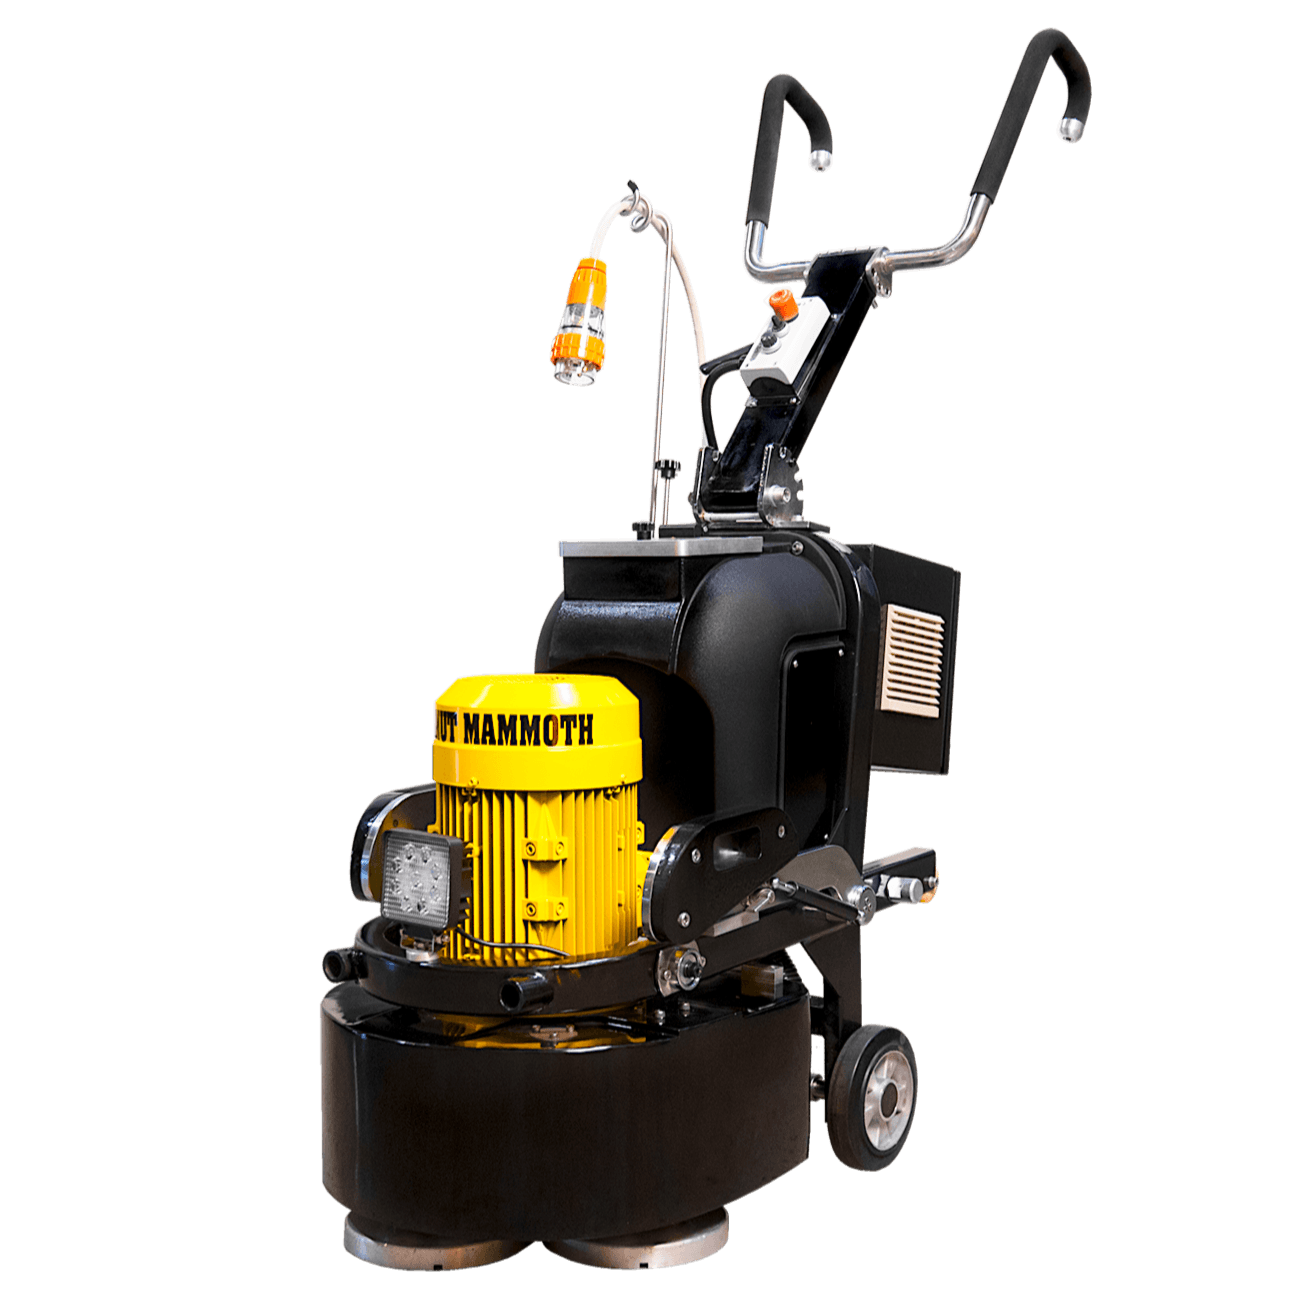 Peanut Mammoth Floor Grinder - Xtreme Polishing Systems: concrete grinders and polishers, cement grinders, and concrete floor grinding materials.